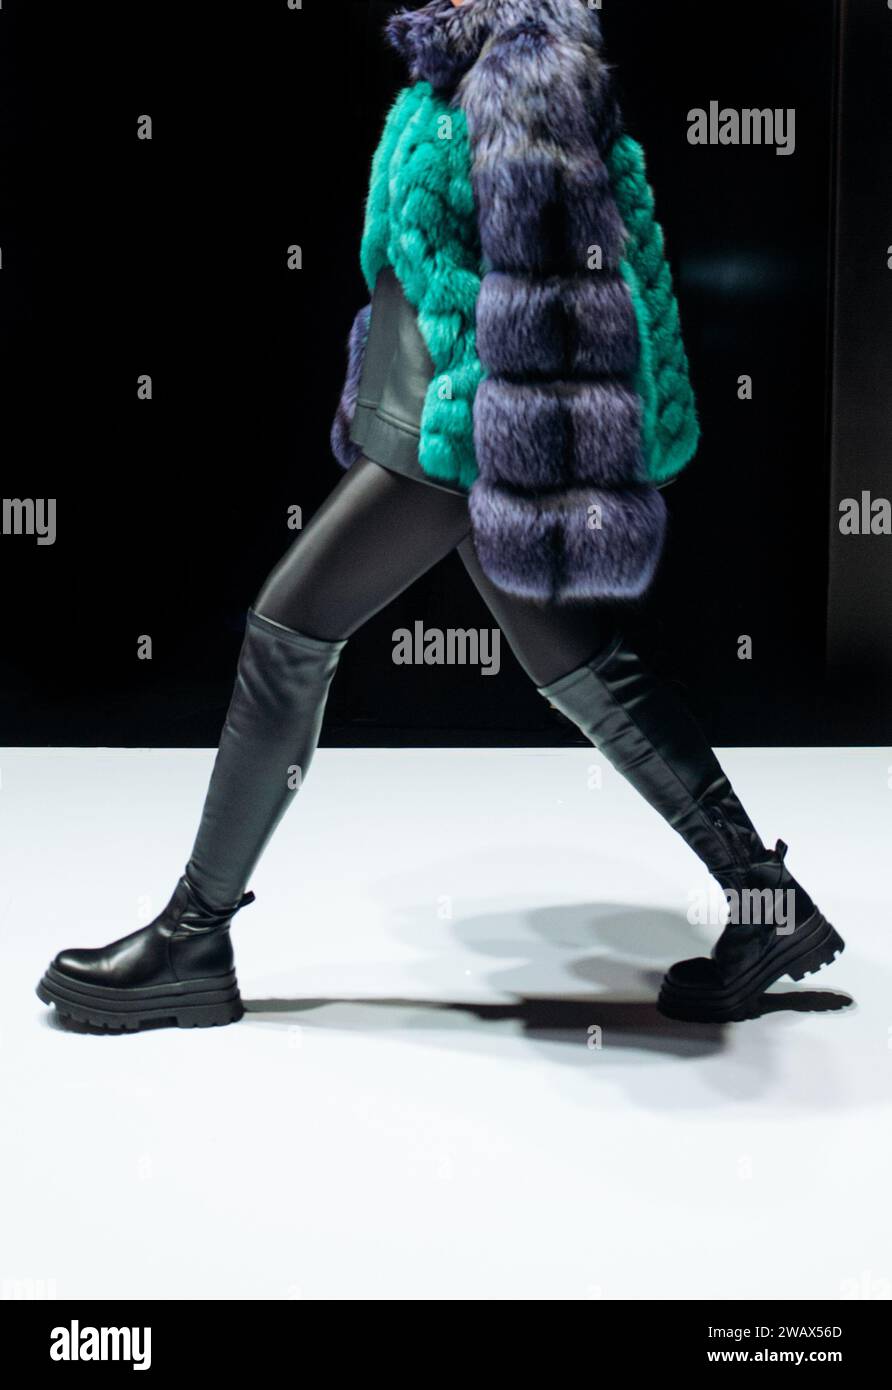 Female figure dressed in a fur coat and black leather boots walking on black background. Stock Photo